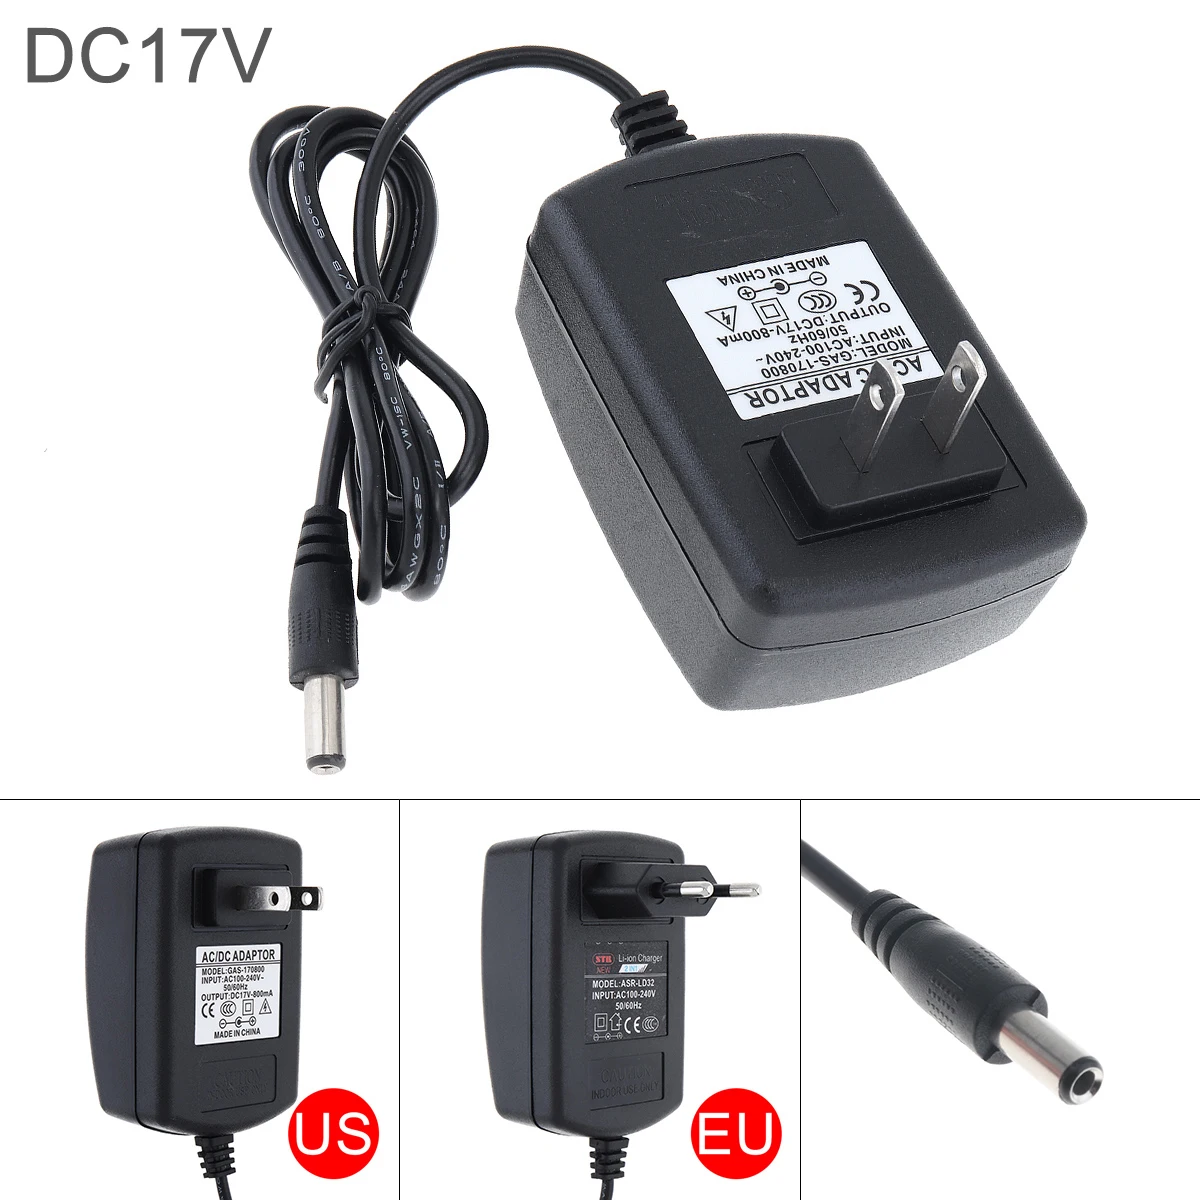 80cm Universal DC 16.8-17V Lithium Battery Rechargeable Charger 100-240V Power Supply for Lithium Electrical Drill Screwdriver 18650 li ion battery pack spot welder universal fixture 21700 lithium batteries welding adjustable battery fixture frame holder